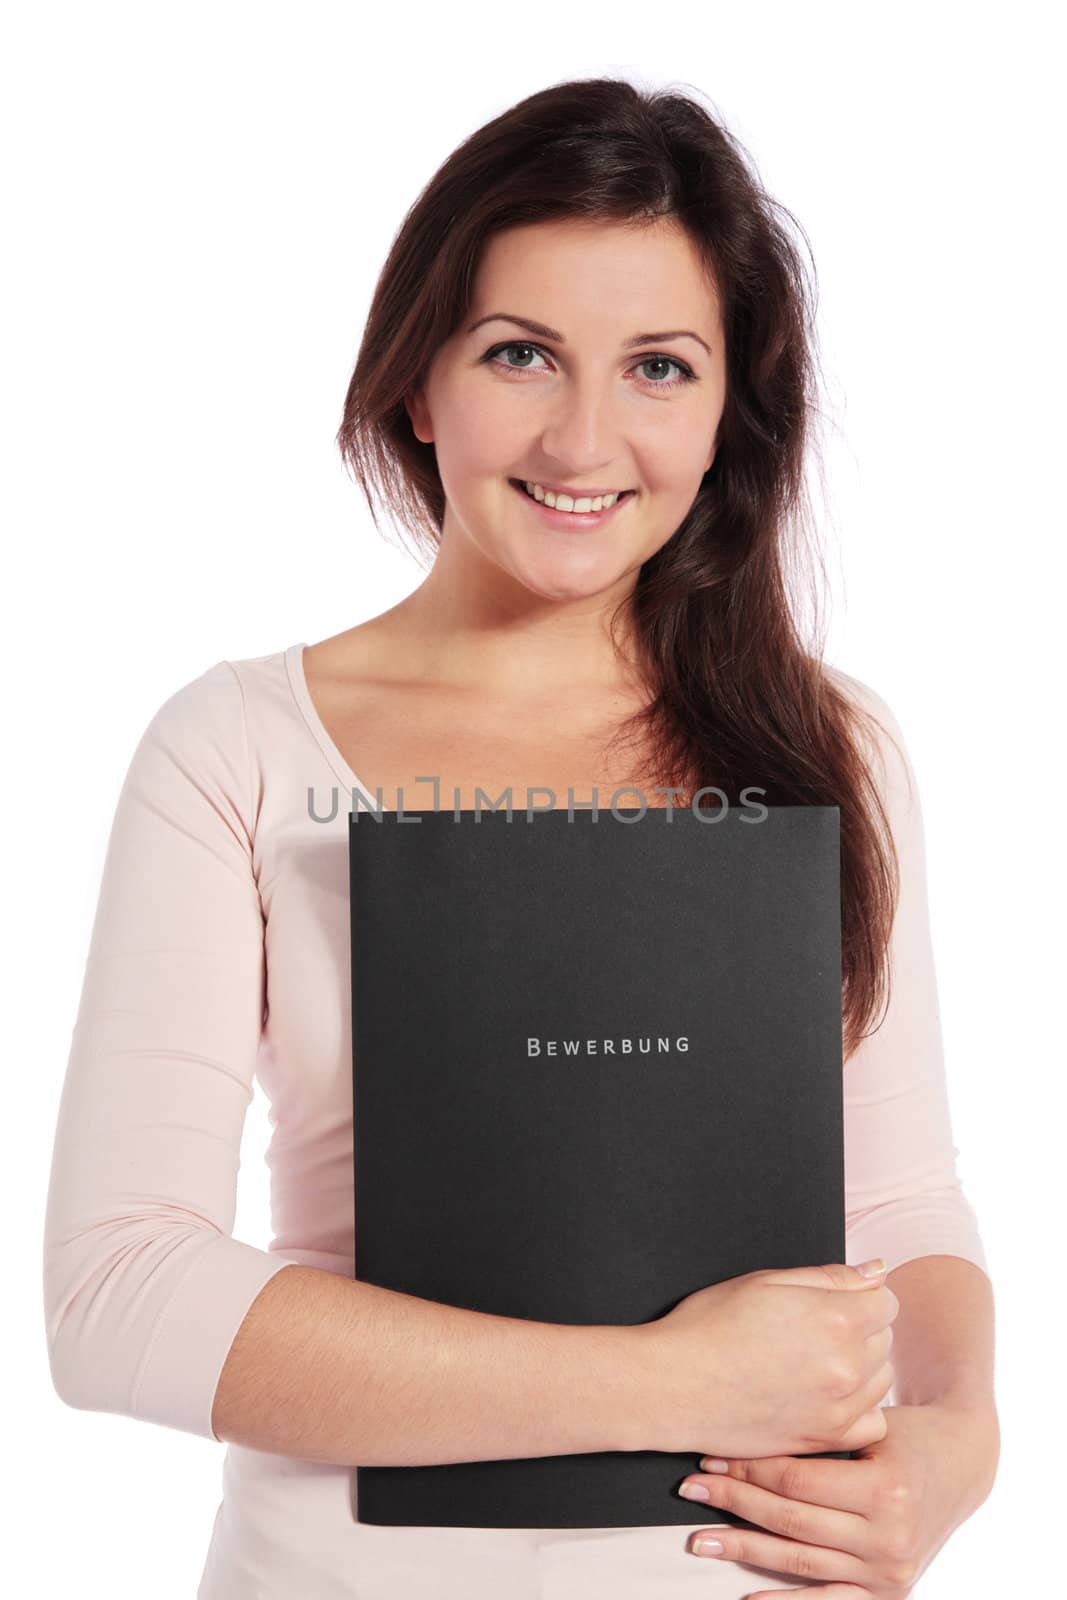 Attractive young woman holding an application file. All on white background.